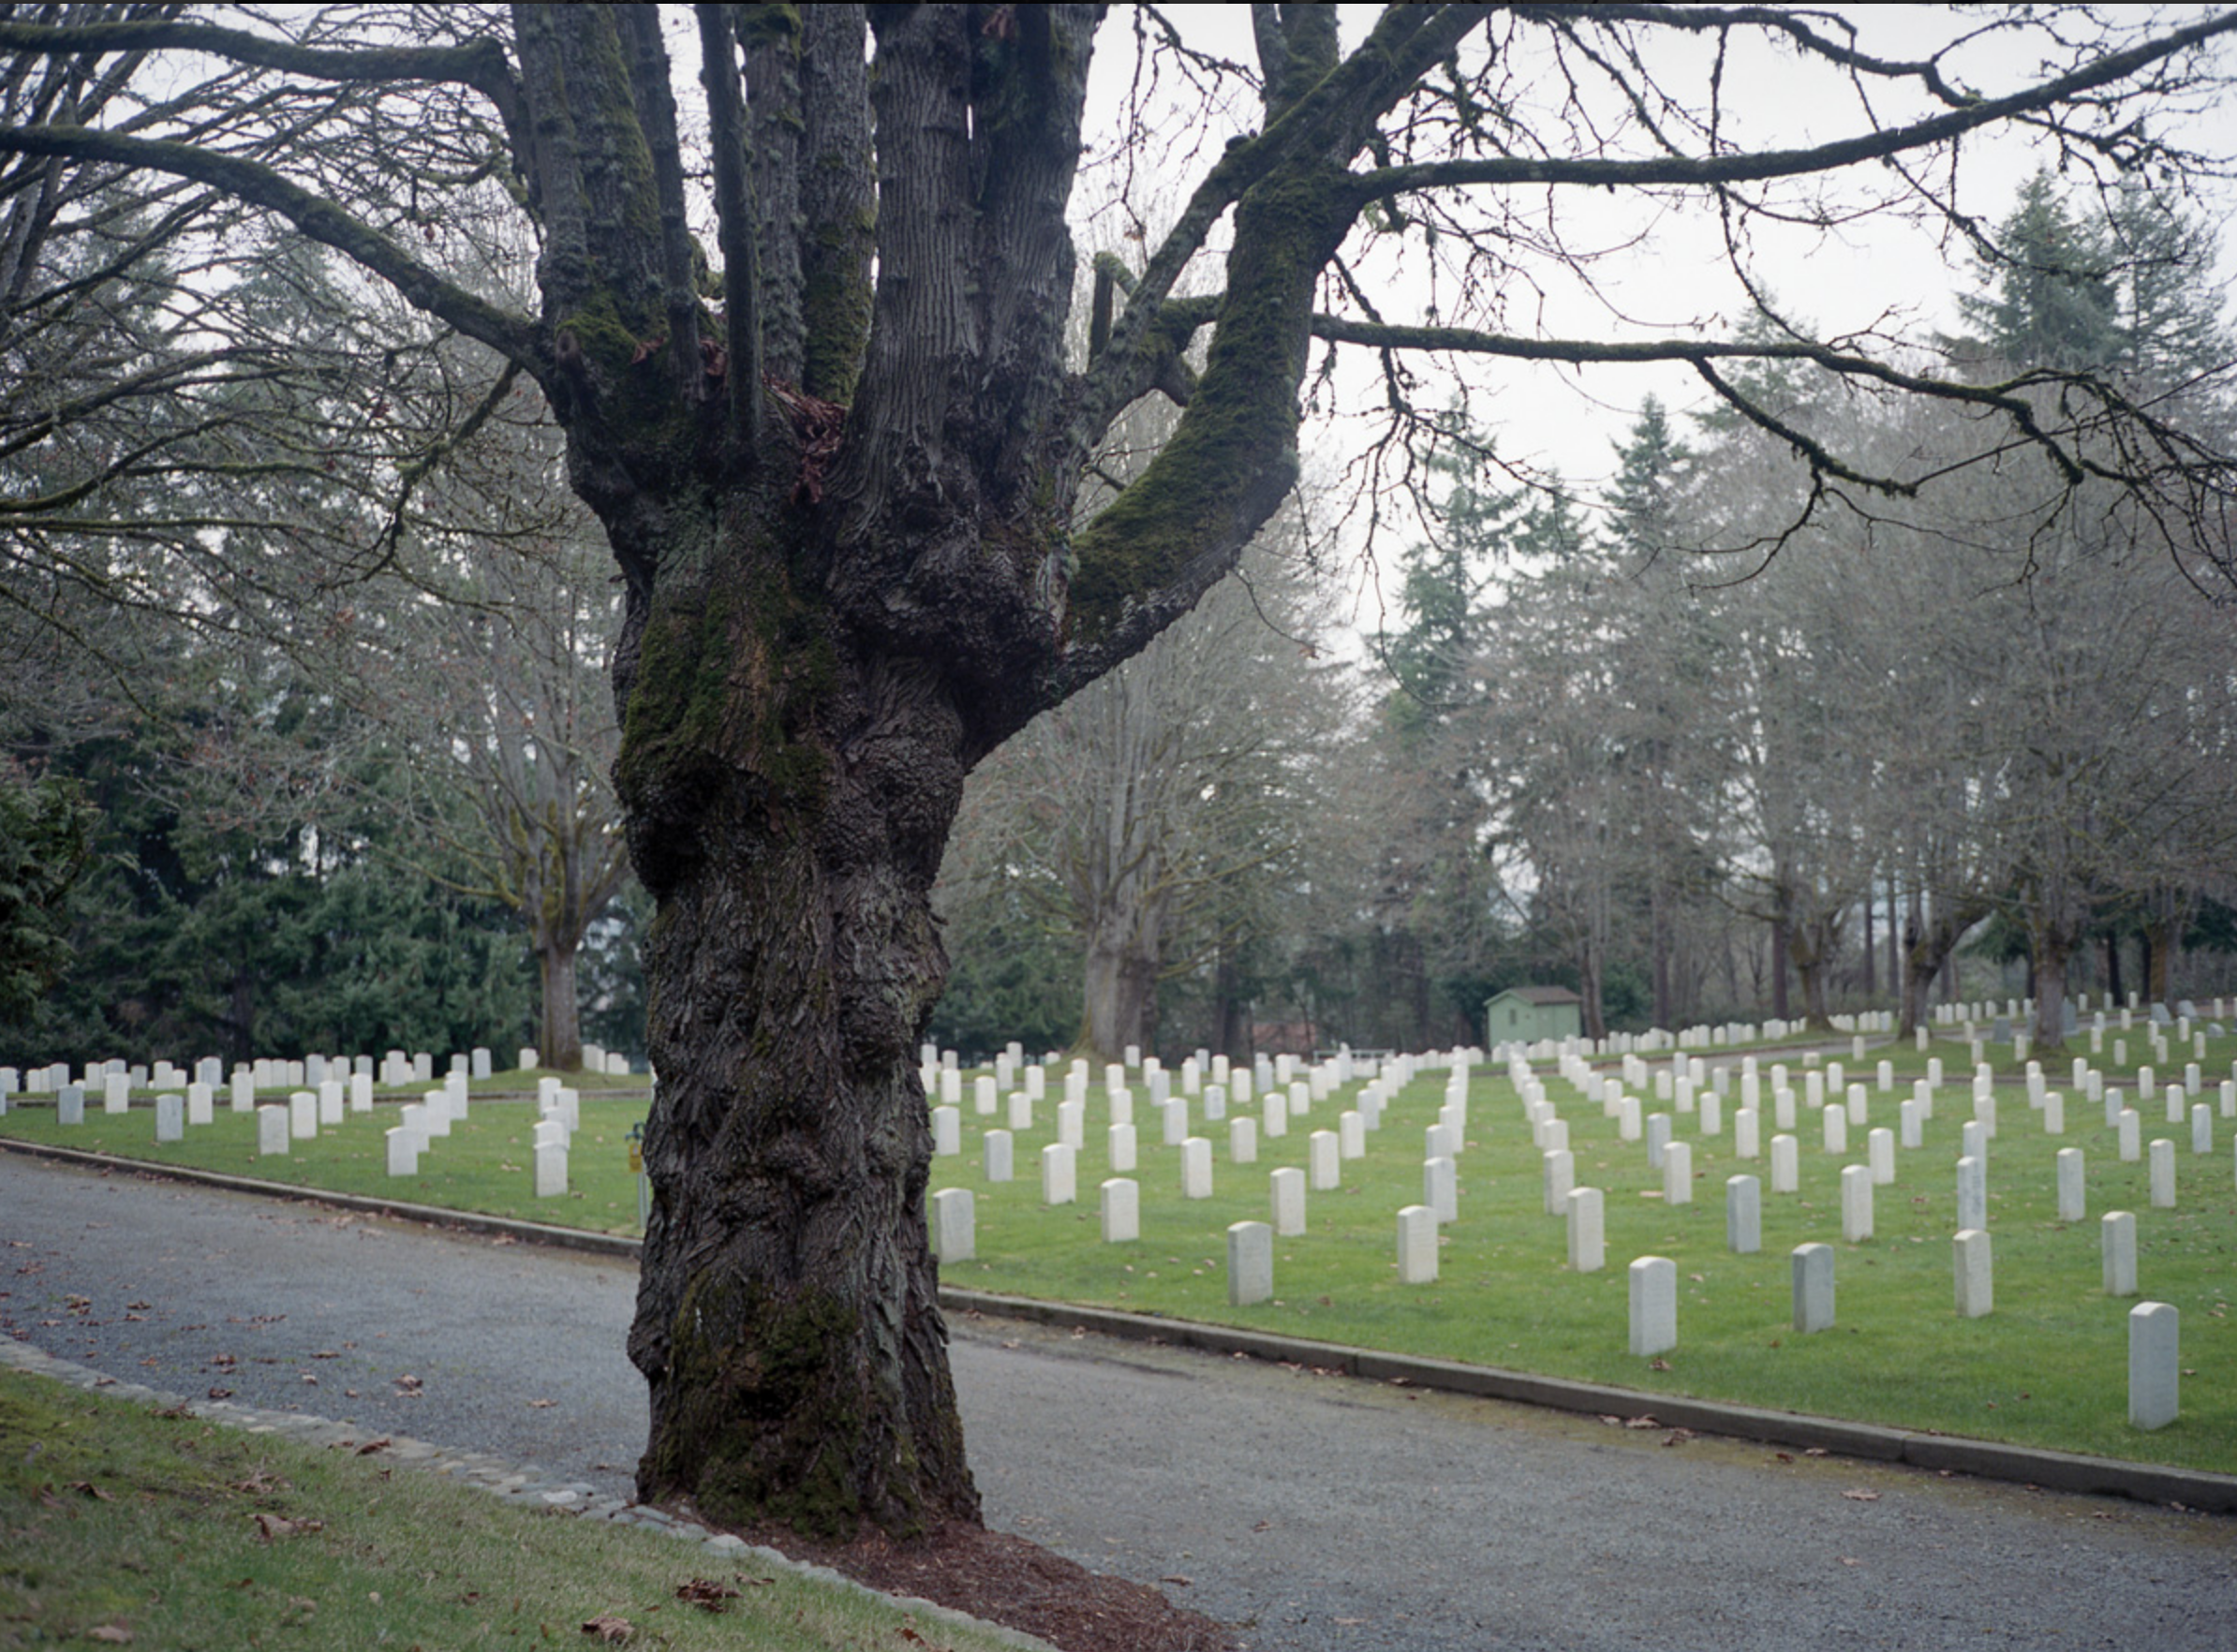 Fort Lawton Post Cemetery, Seattle, Washington. Image by Kalen Goodluck / High Country News. United States, undated.